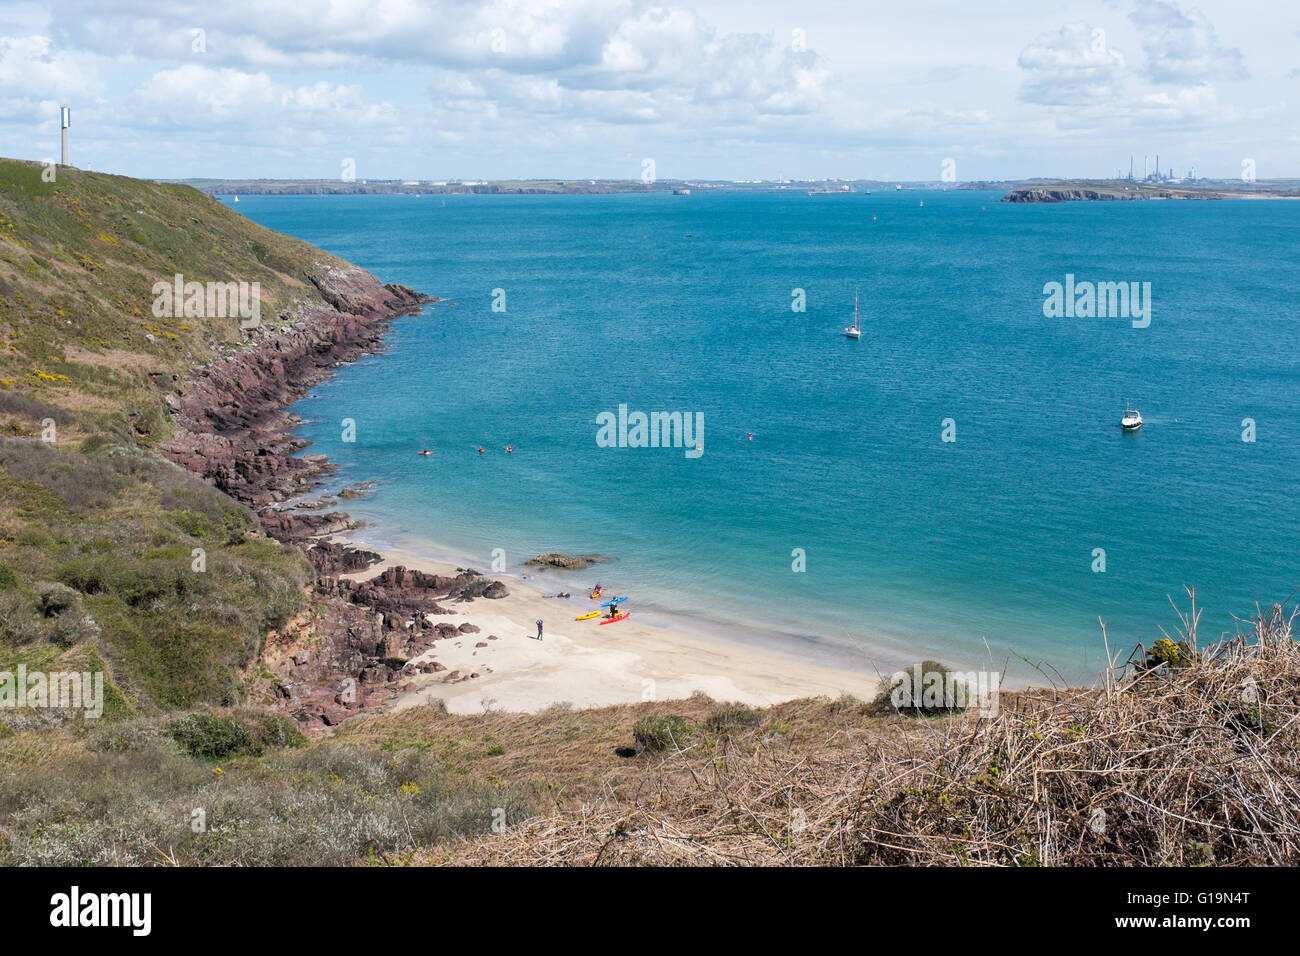 Beach at Watwick Bay on the Milford Haven Estuary in Pembrokeshire, Wales Stock Photo